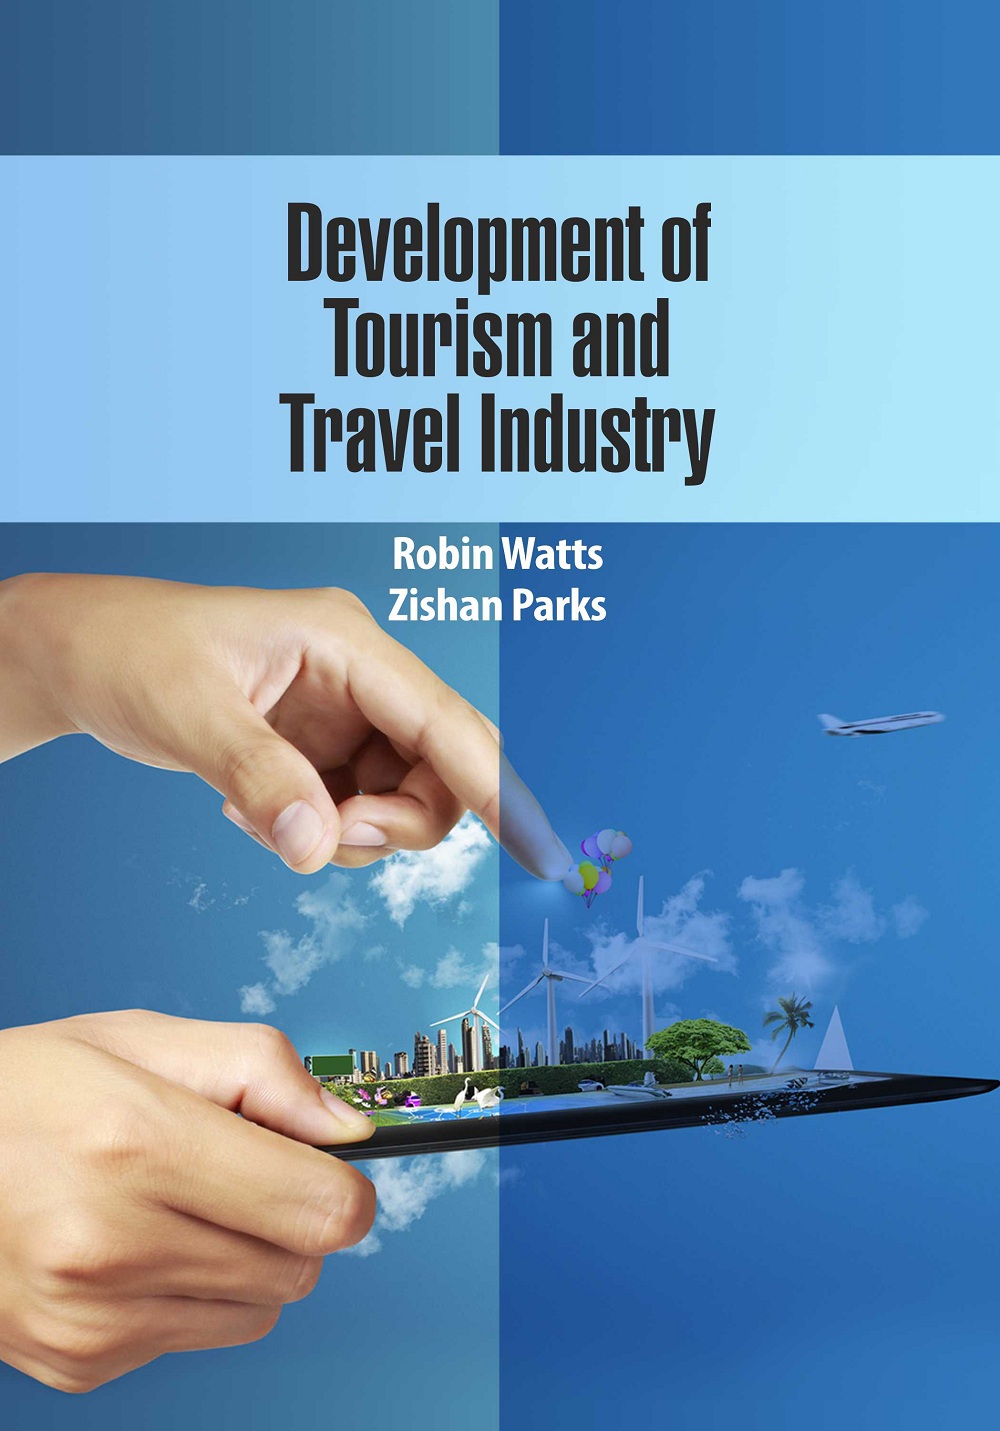 Development of Tourism and Travel Industry